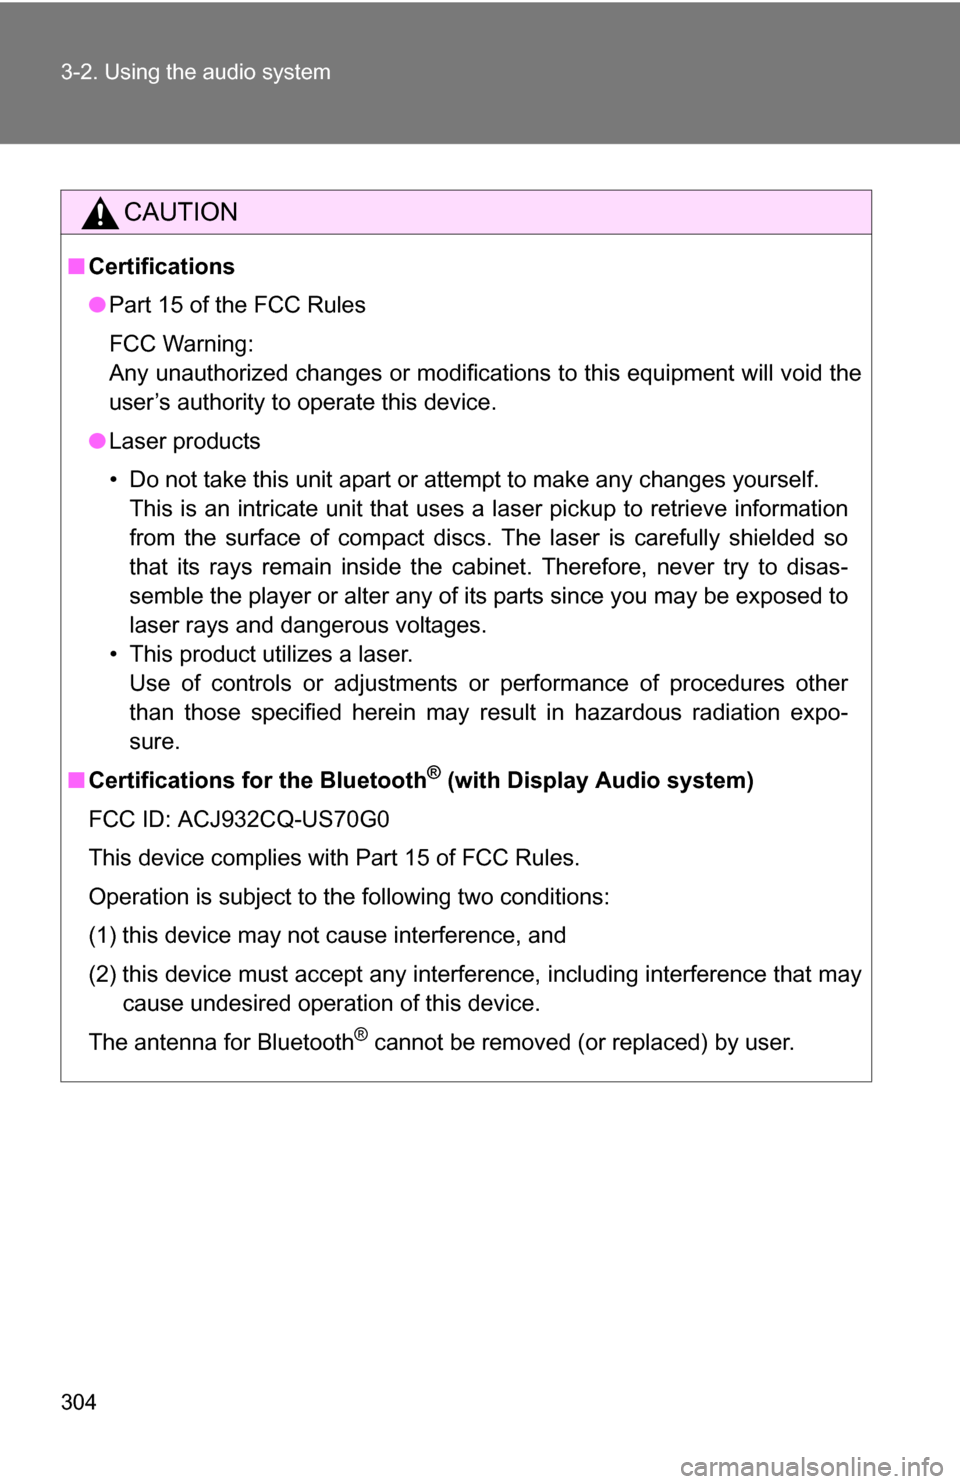 TOYOTA HIGHLANDER 2013 XU50 / 3.G Owners Manual 304 3-2. Using the audio system
CAUTION
■Certifications
●Part 15 of the FCC Rules
FCC Warning:
Any unauthorized changes or modifications to this equipment will void the
user’s authority to opera